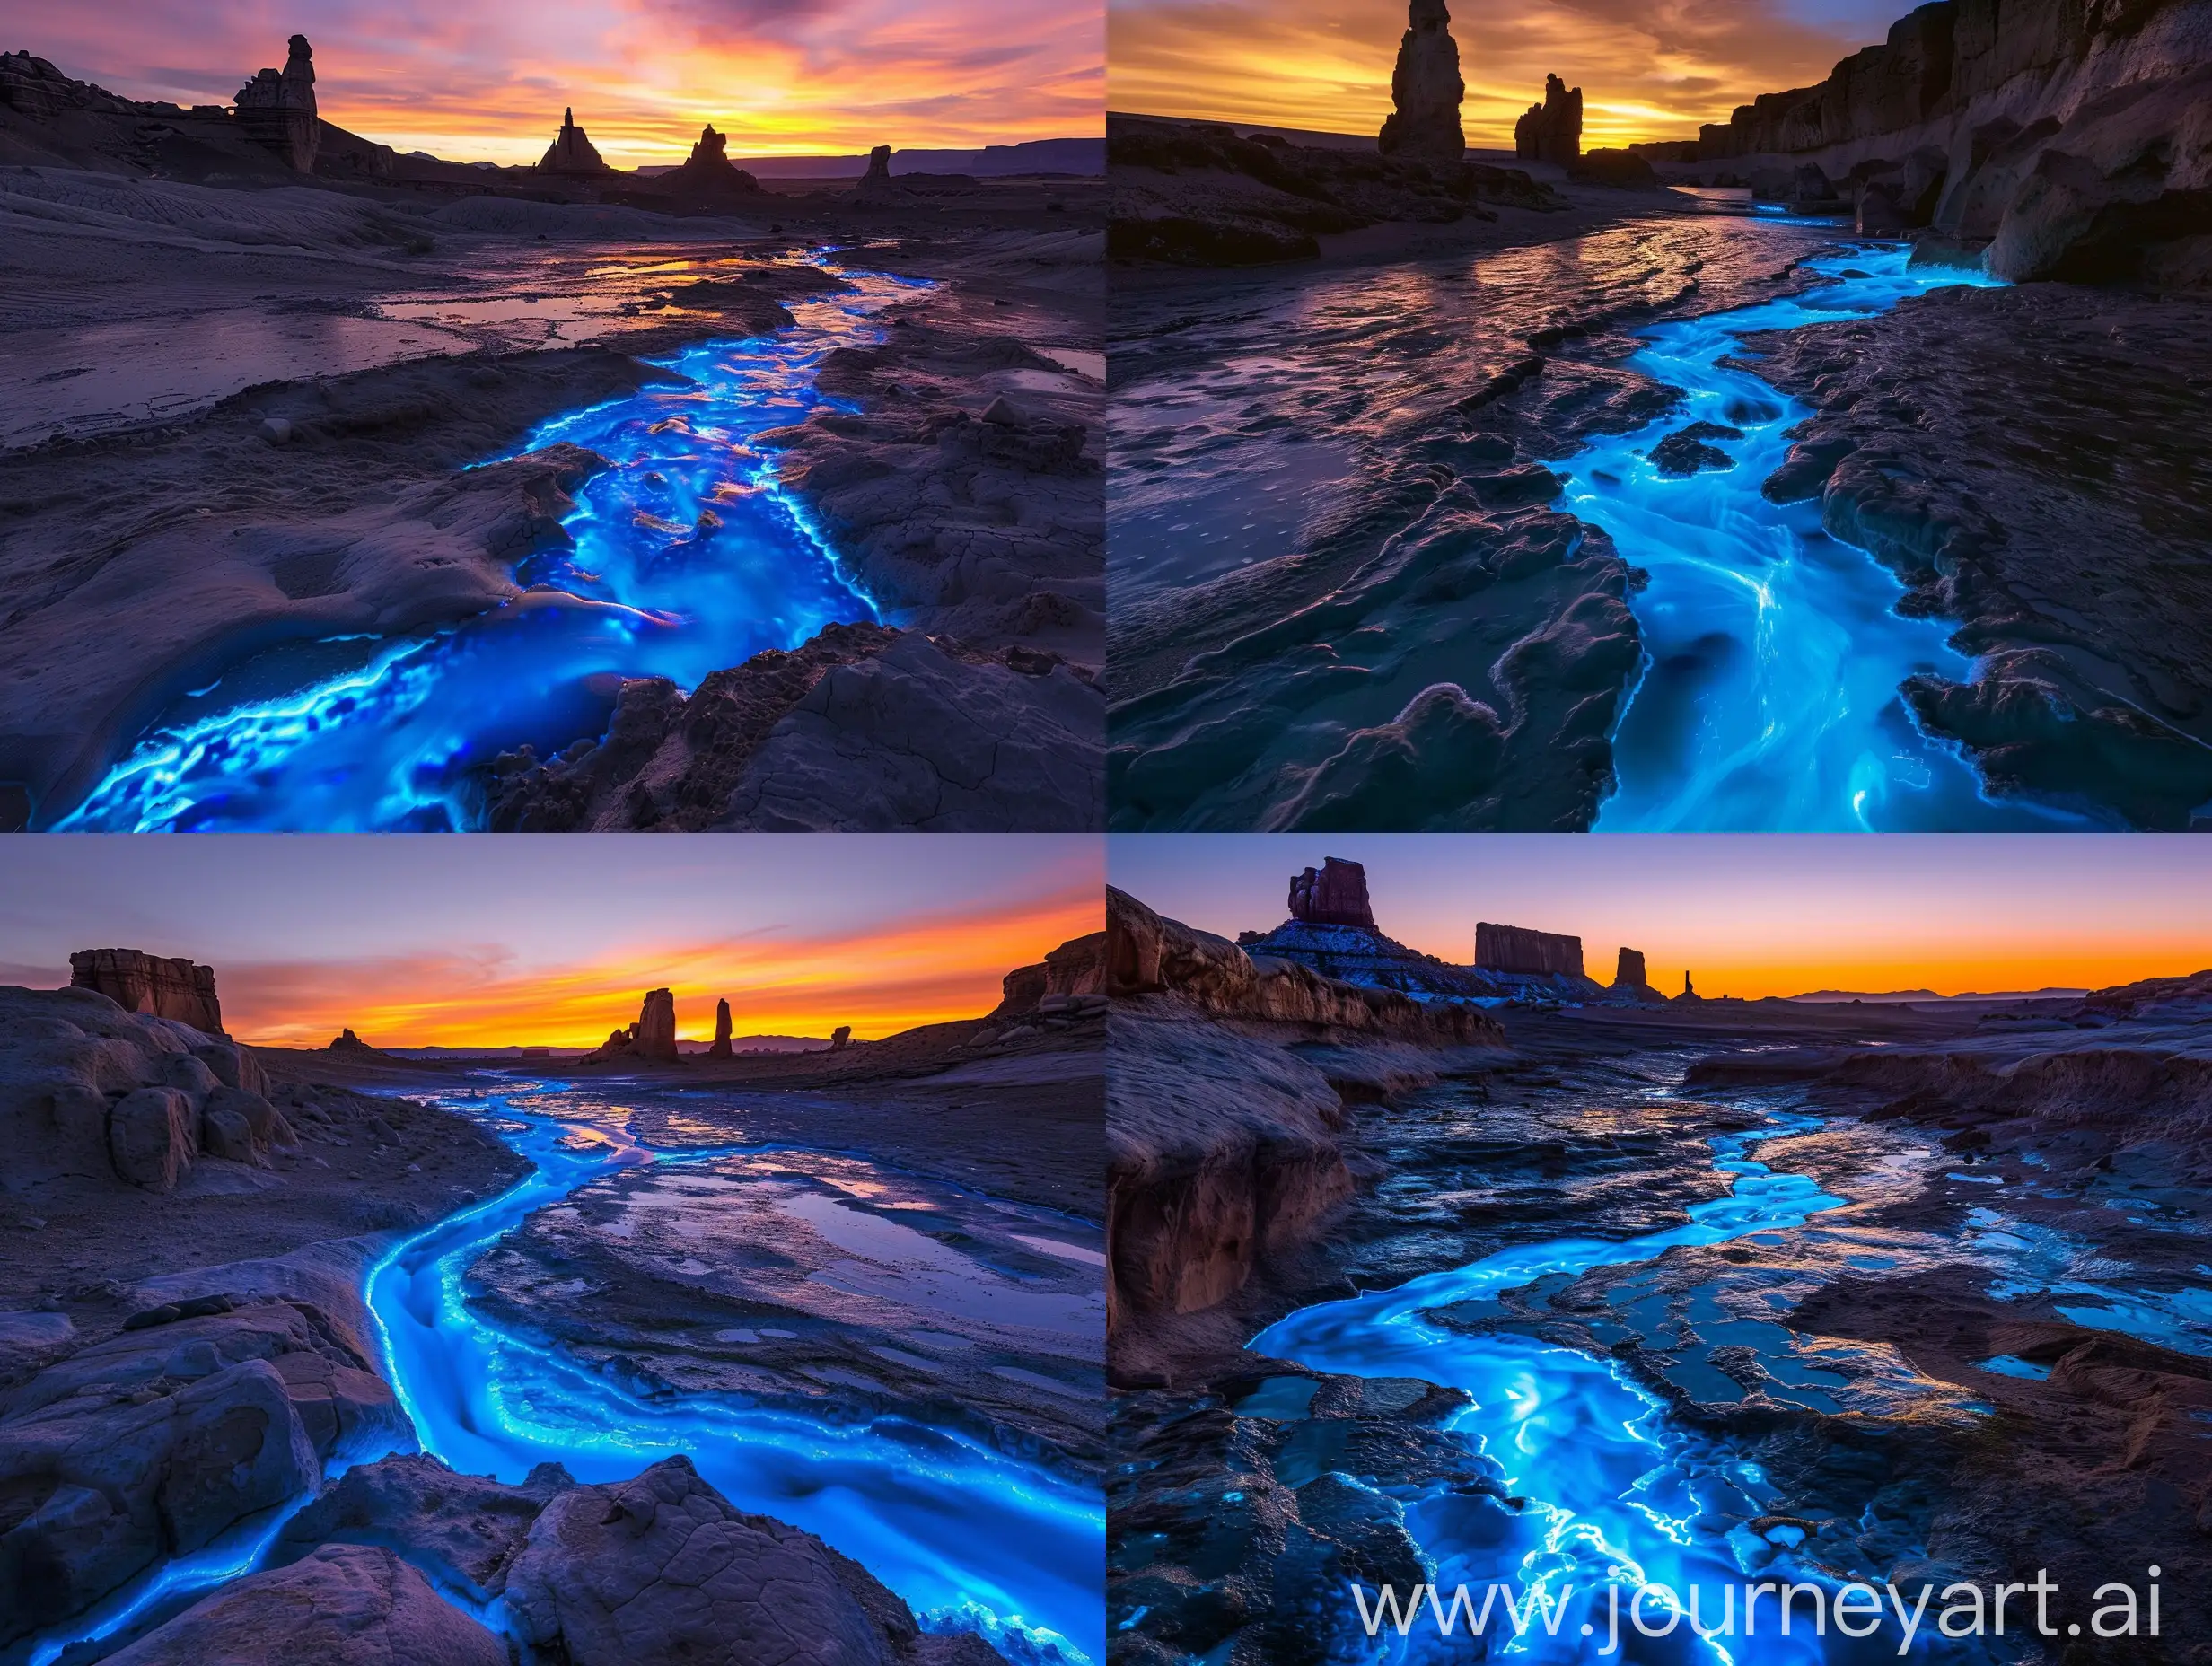 Ultra high definition, ultra fine cinematic photograph. a river of glowing blue liquid flowing through the desert, with monoliths in the background, at sunset, high definition photography::0.9 illustration, drawing, cartoonish, mist, fog, haze, rain, tilt-shift, toy-model, cgi, watermark::-1 Ultra high definition, ultra fine cinematic photograph.